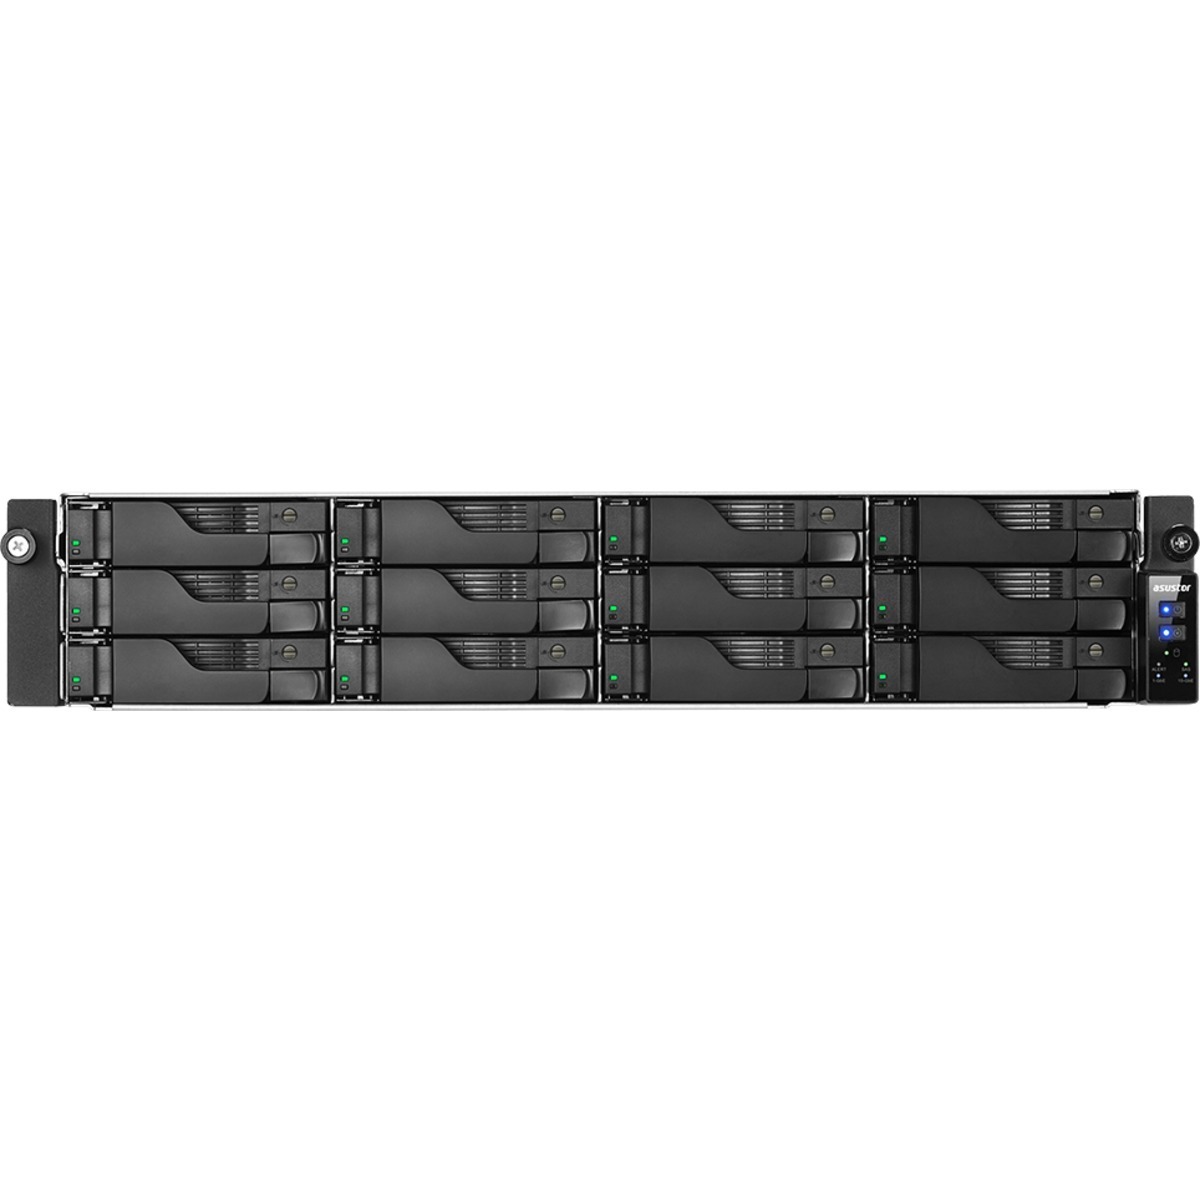 ASUSTOR AS7112RDX NAS - Network Attached Storage Device Burn-In Tested Configurations